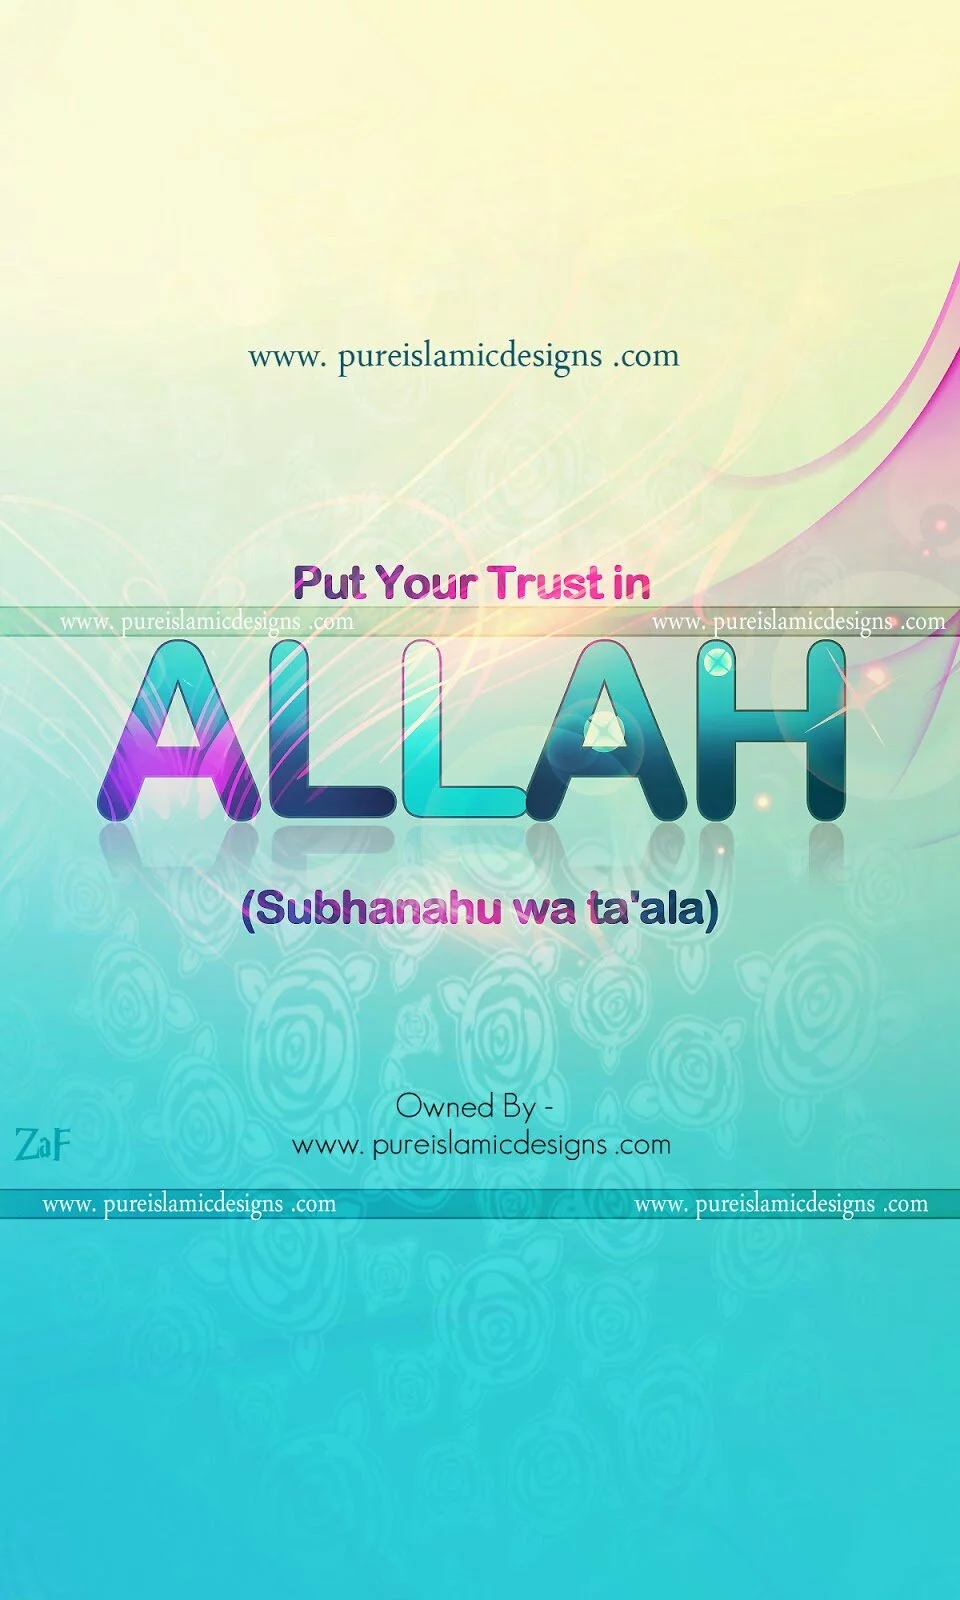 Put Your Trust in Allah (swt)